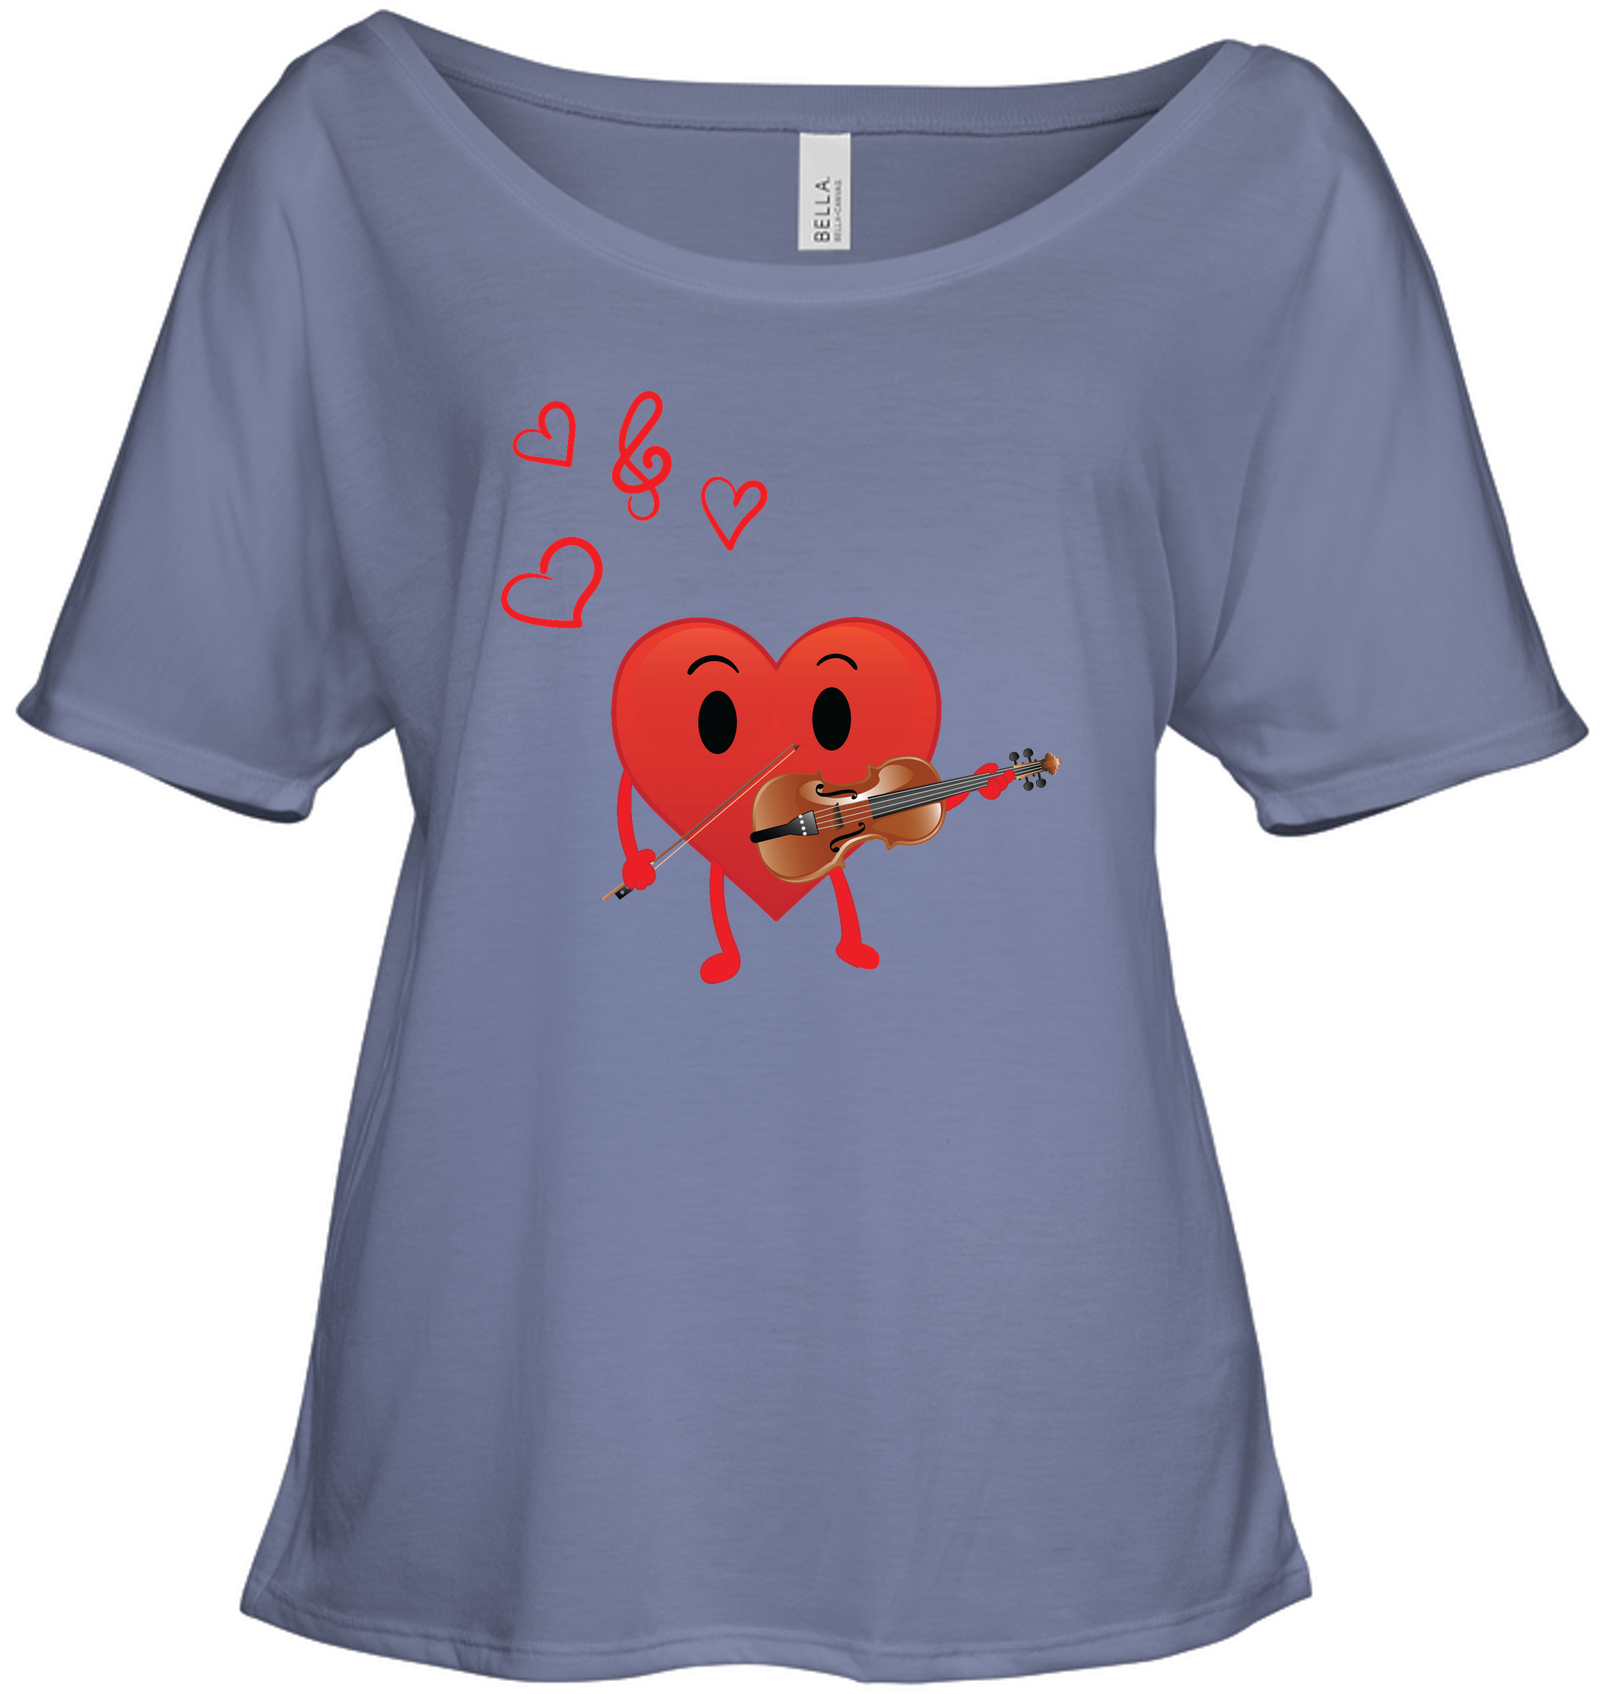 Heart Playing Violin - Bella + Canvas Women's Slouchy Tee